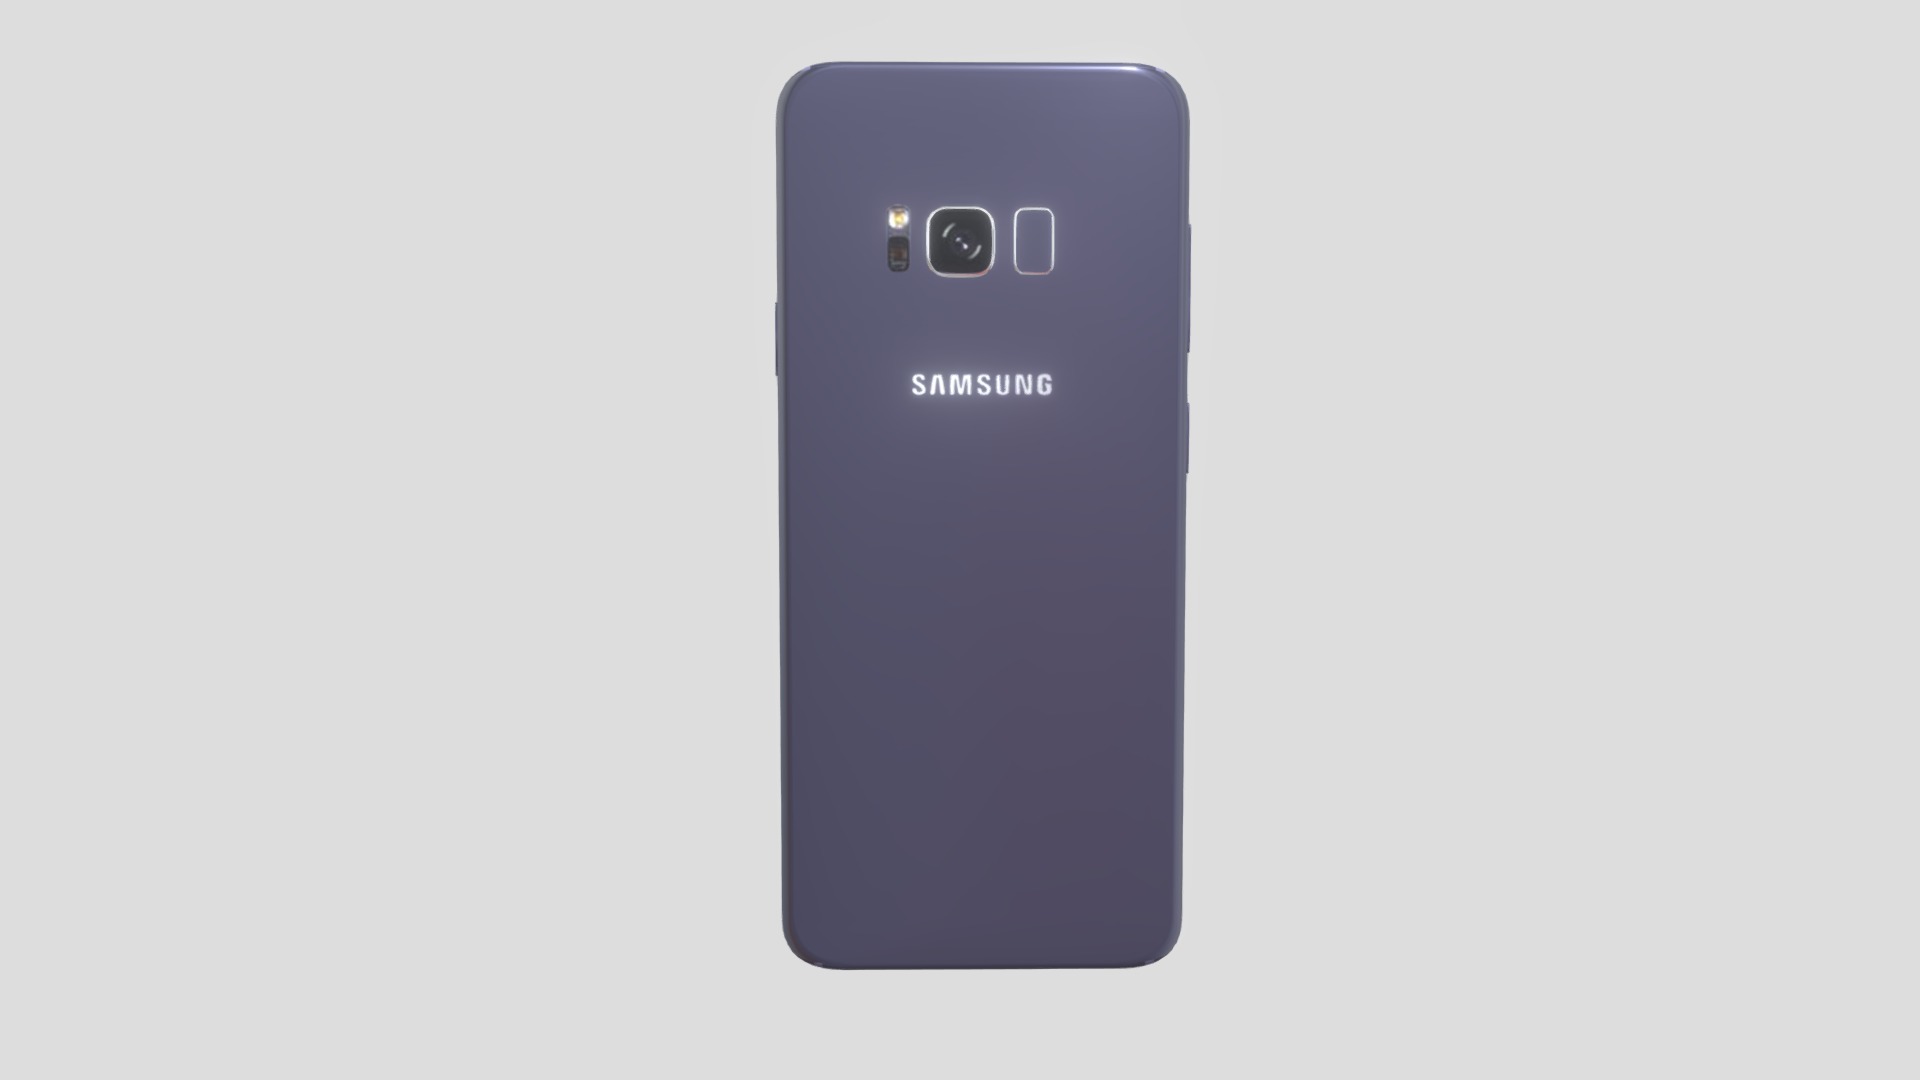 3D model Samsung Galaxy S8 Plus Orchid Grey - This is a 3D model of the Samsung Galaxy S8 Plus Orchid Grey. The 3D model is about graphical user interface, application.